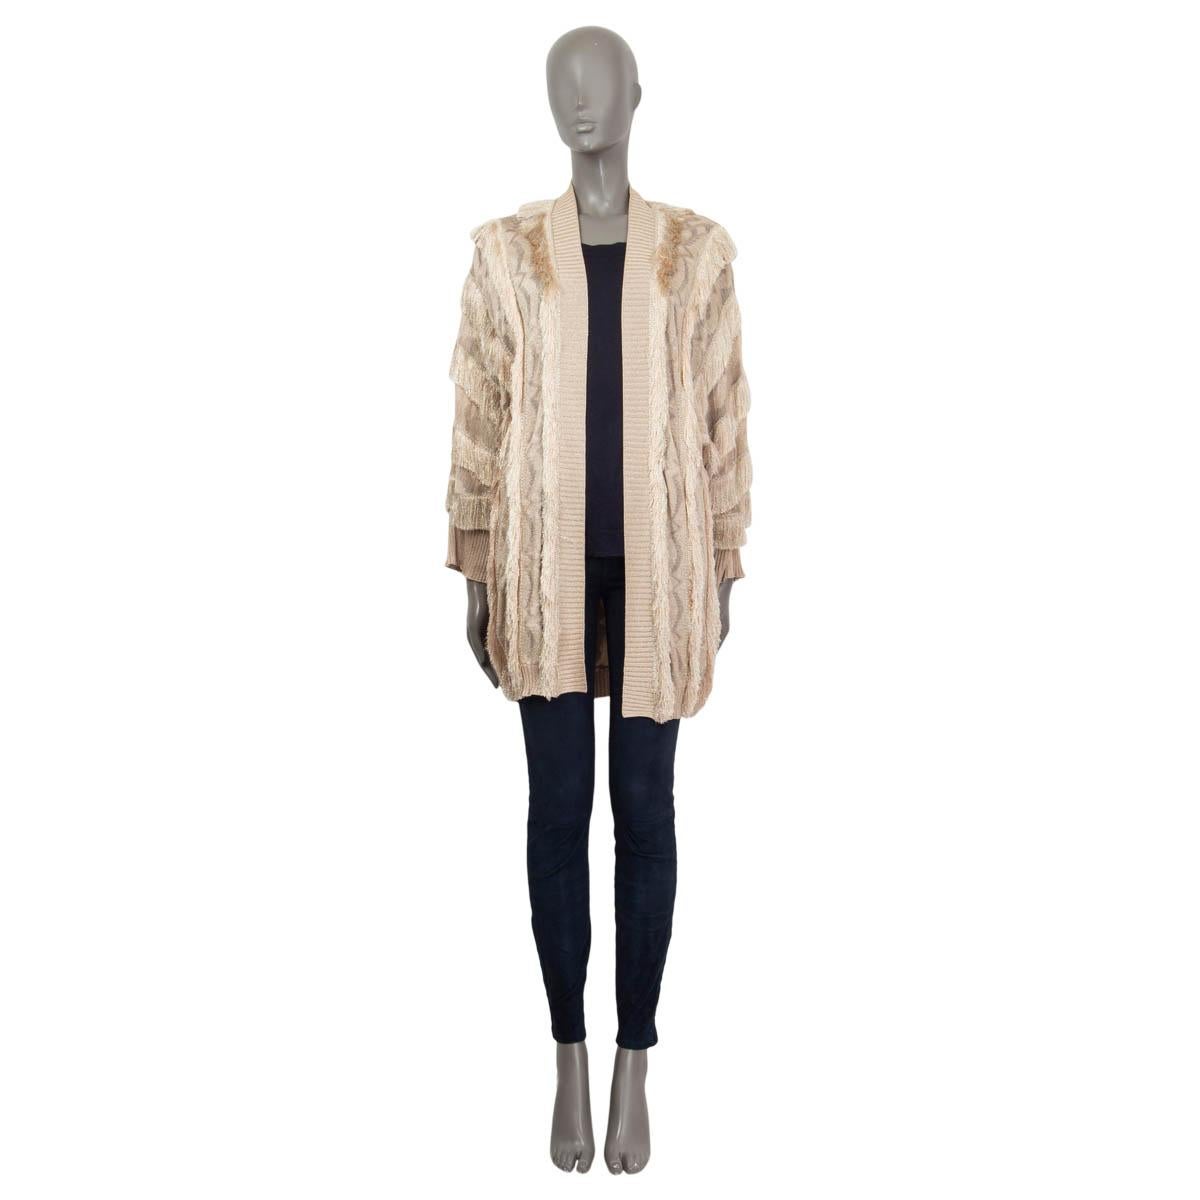 100% authentic Missoni open cardigan in champagne and light gold viscose (80%), cupro (13%) and polyester (7%). Features fringes all over the cardigan and long raglan sleeves (sleeve measurements taken from the neck). Unlined. Has been worn and is